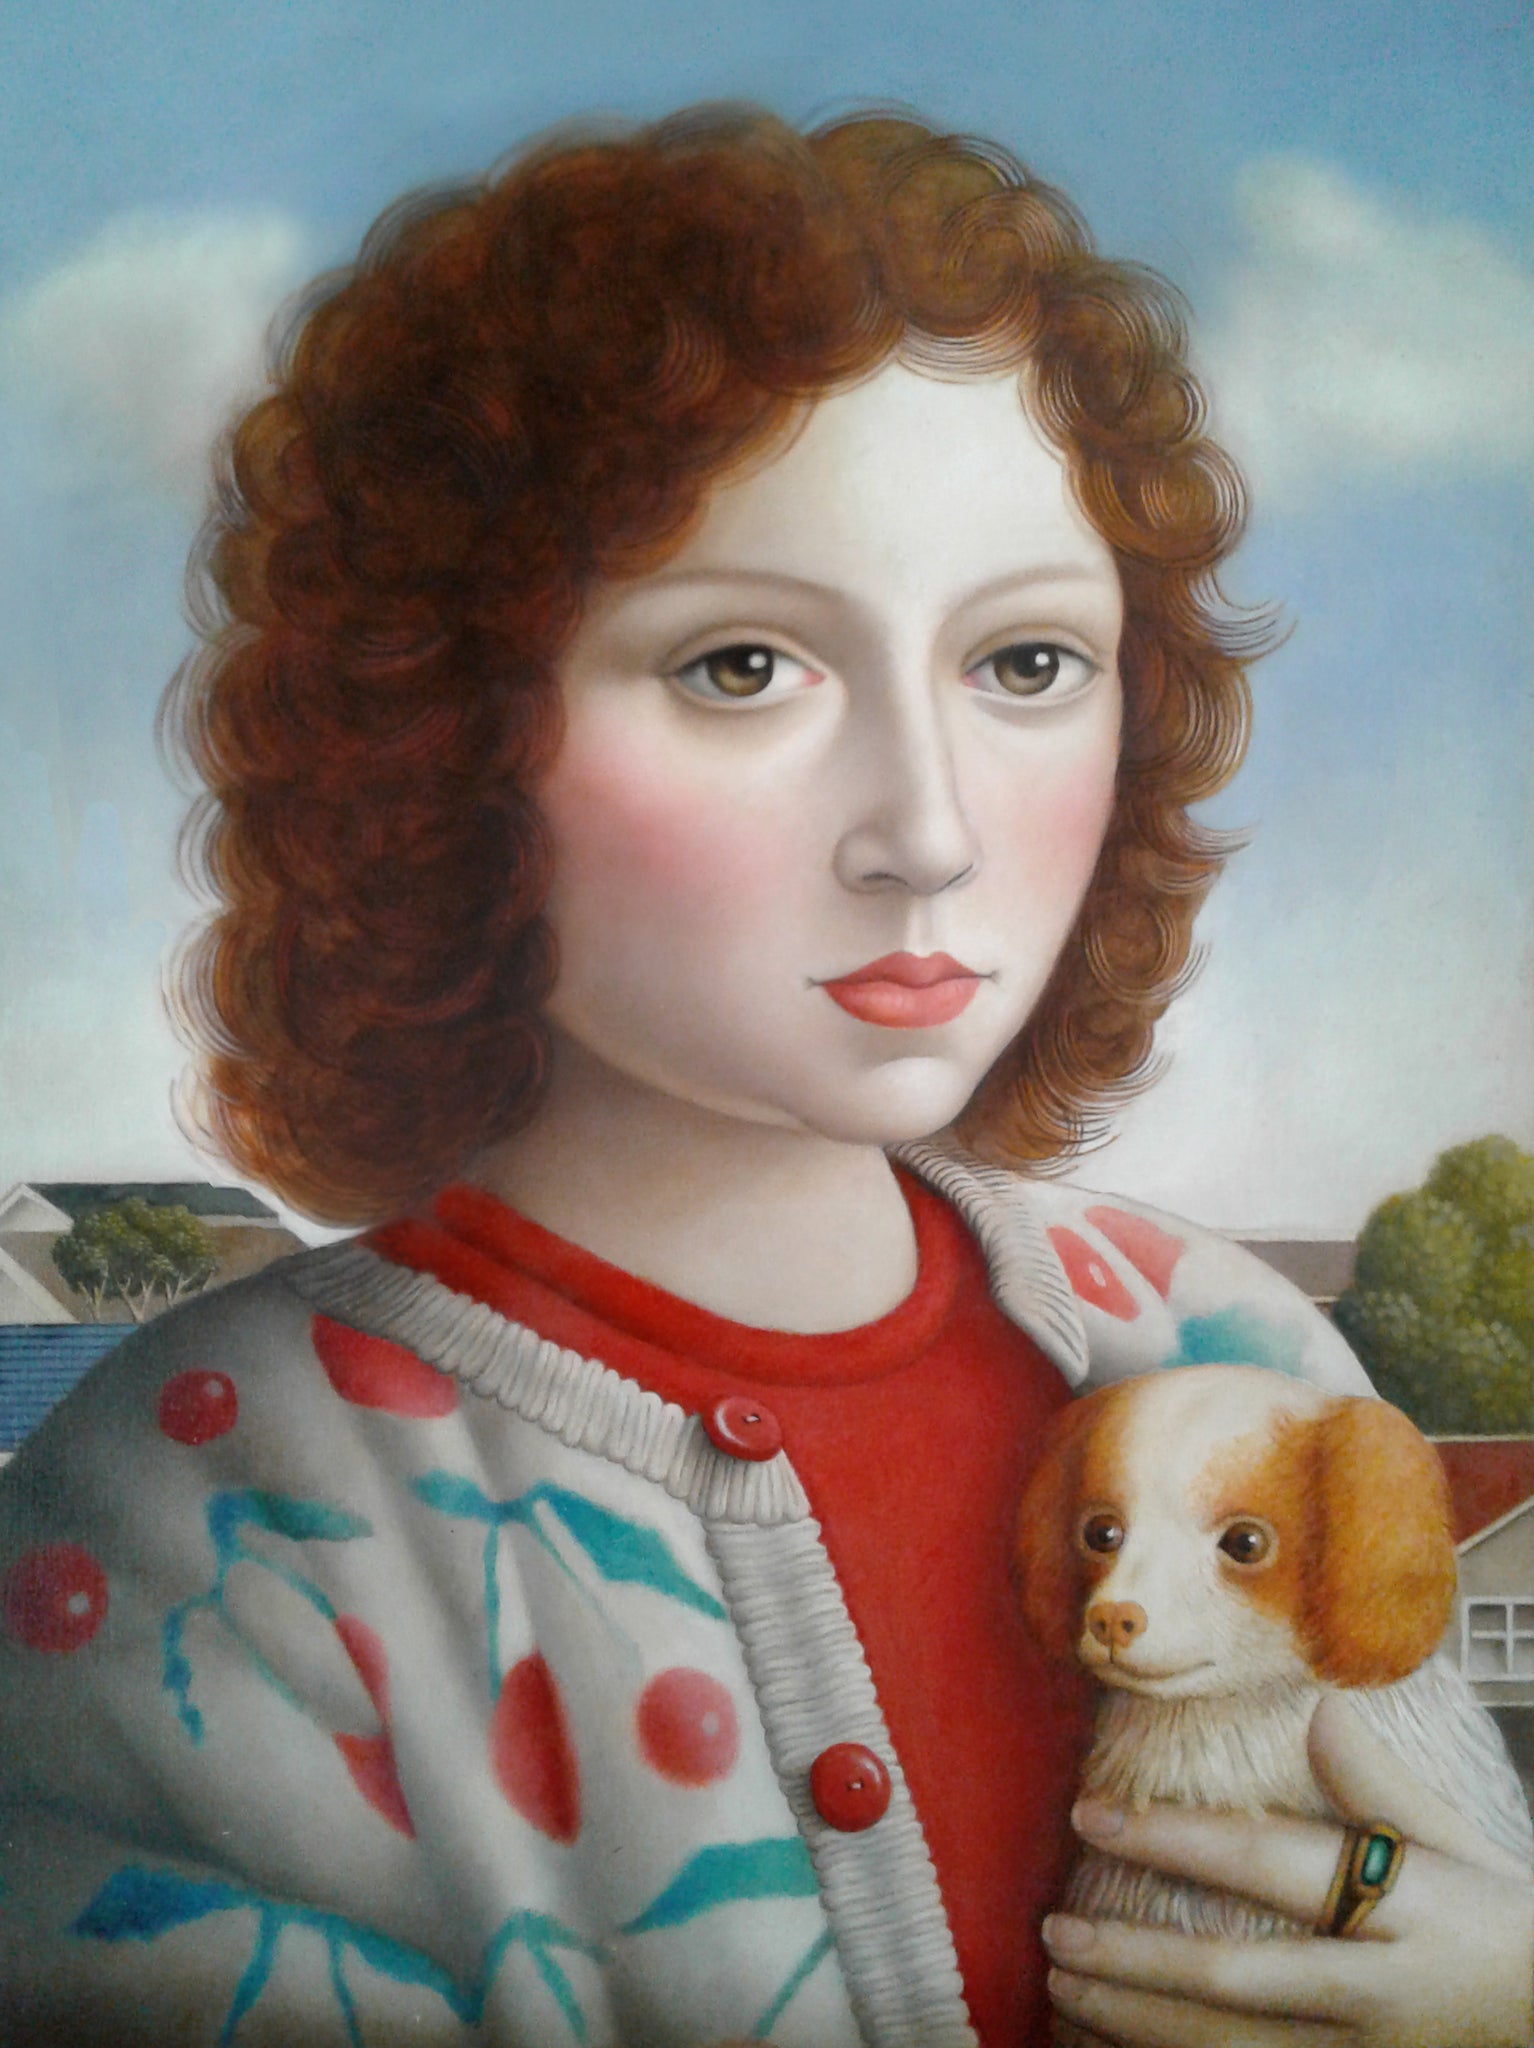 Amy Hill, "Woman with Dog" SOLD